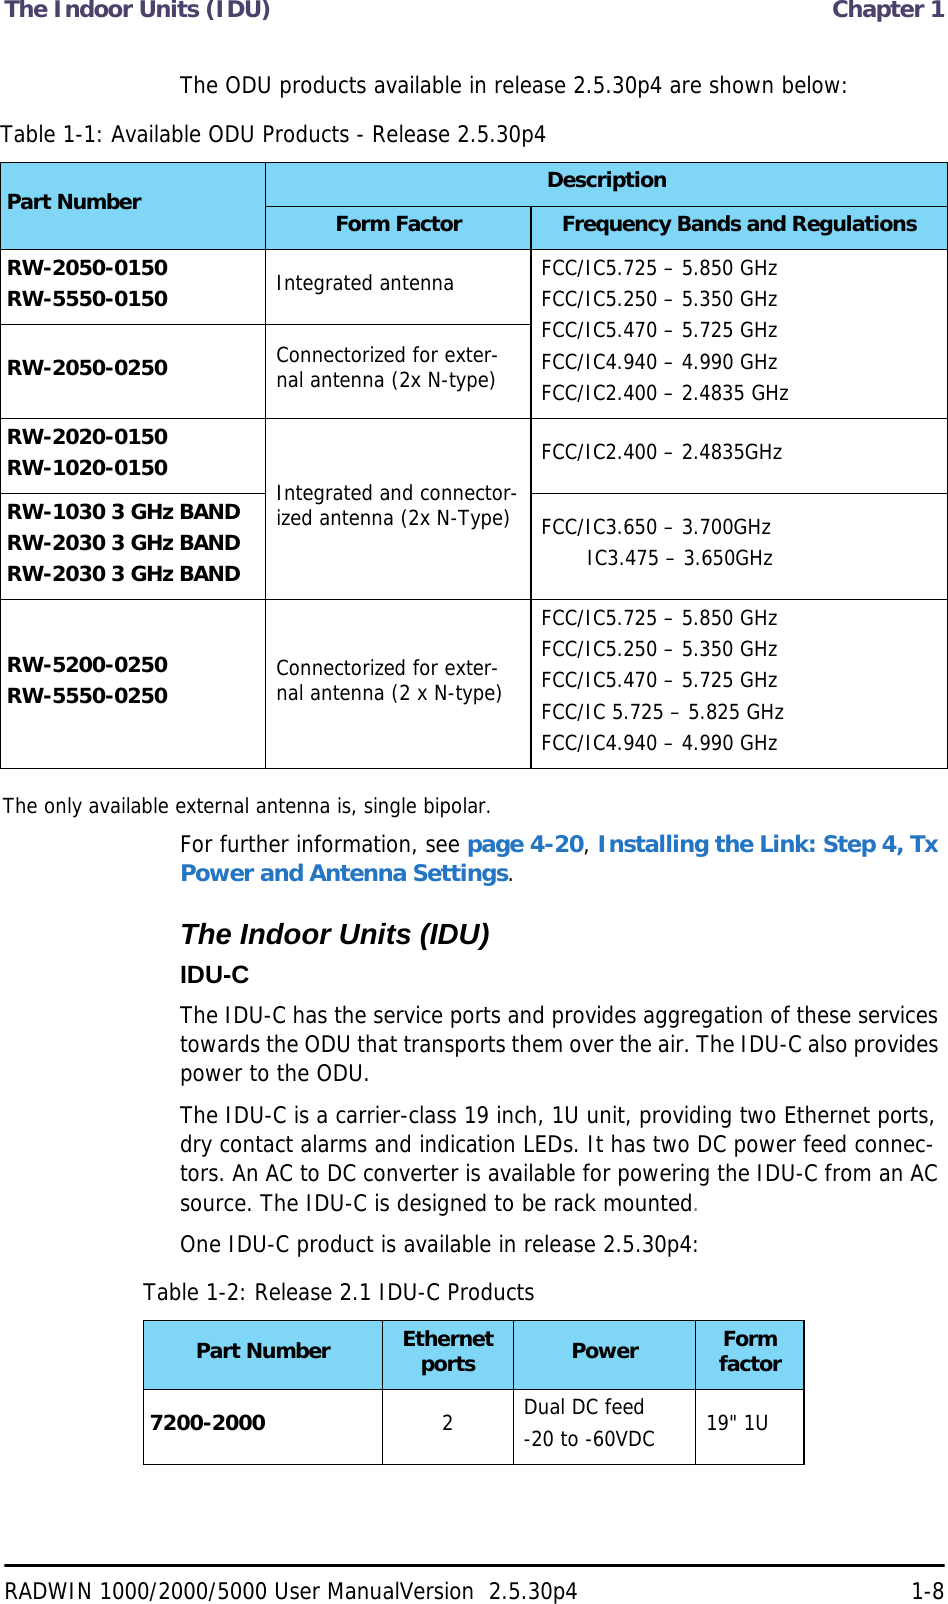 The Indoor Units (IDU)  Chapter 1RADWIN 1000/2000/5000 User ManualVersion  2.5.30p4 1-8The ODU products available in release 2.5.30p4 are shown below:The only available external antenna is, single bipolar.For further information, see page 4-20, Installing the Link: Step 4, Tx Power and Antenna Settings.The Indoor Units (IDU)IDU-CThe IDU-C has the service ports and provides aggregation of these services towards the ODU that transports them over the air. The IDU-C also provides power to the ODU.The IDU-C is a carrier-class 19 inch, 1U unit, providing two Ethernet ports, dry contact alarms and indication LEDs. It has two DC power feed connec-tors. An AC to DC converter is available for powering the IDU-C from an AC source. The IDU-C is designed to be rack mounted.One IDU-C product is available in release 2.5.30p4:Table 1-1: Available ODU Products - Release 2.5.30p4Part Number DescriptionForm Factor Frequency Bands and RegulationsRW-2050-0150RW-5550-0150 Integrated antenna  FCC/IC5.725 – 5.850 GHzFCC/IC5.250 – 5.350 GHzFCC/IC5.470 – 5.725 GHzFCC/IC4.940 – 4.990 GHzFCC/IC2.400 – 2.4835 GHzRW-2050-0250 Connectorized for exter-nal antenna (2x N-type)RW-2020-0150RW-1020-0150 Integrated and connector-ized antenna (2x N-Type)FCC/IC2.400 – 2.4835GHzRW-1030 3 GHz BANDRW-2030 3 GHz BANDRW-2030 3 GHz BANDFCC/IC3.650 – 3.700GHz       IC3.475 – 3.650GHzRW-5200-0250RW-5550-0250 Connectorized for exter-nal antenna (2 x N-type)FCC/IC5.725 – 5.850 GHzFCC/IC5.250 – 5.350 GHzFCC/IC5.470 – 5.725 GHzFCC/IC 5.725 – 5.825 GHzFCC/IC4.940 – 4.990 GHzTable 1-2: Release 2.1 IDU-C ProductsPart Number Ethernet ports Power Form factor7200-2000 2Dual DC feed-20 to -60VDC 19&quot; 1U